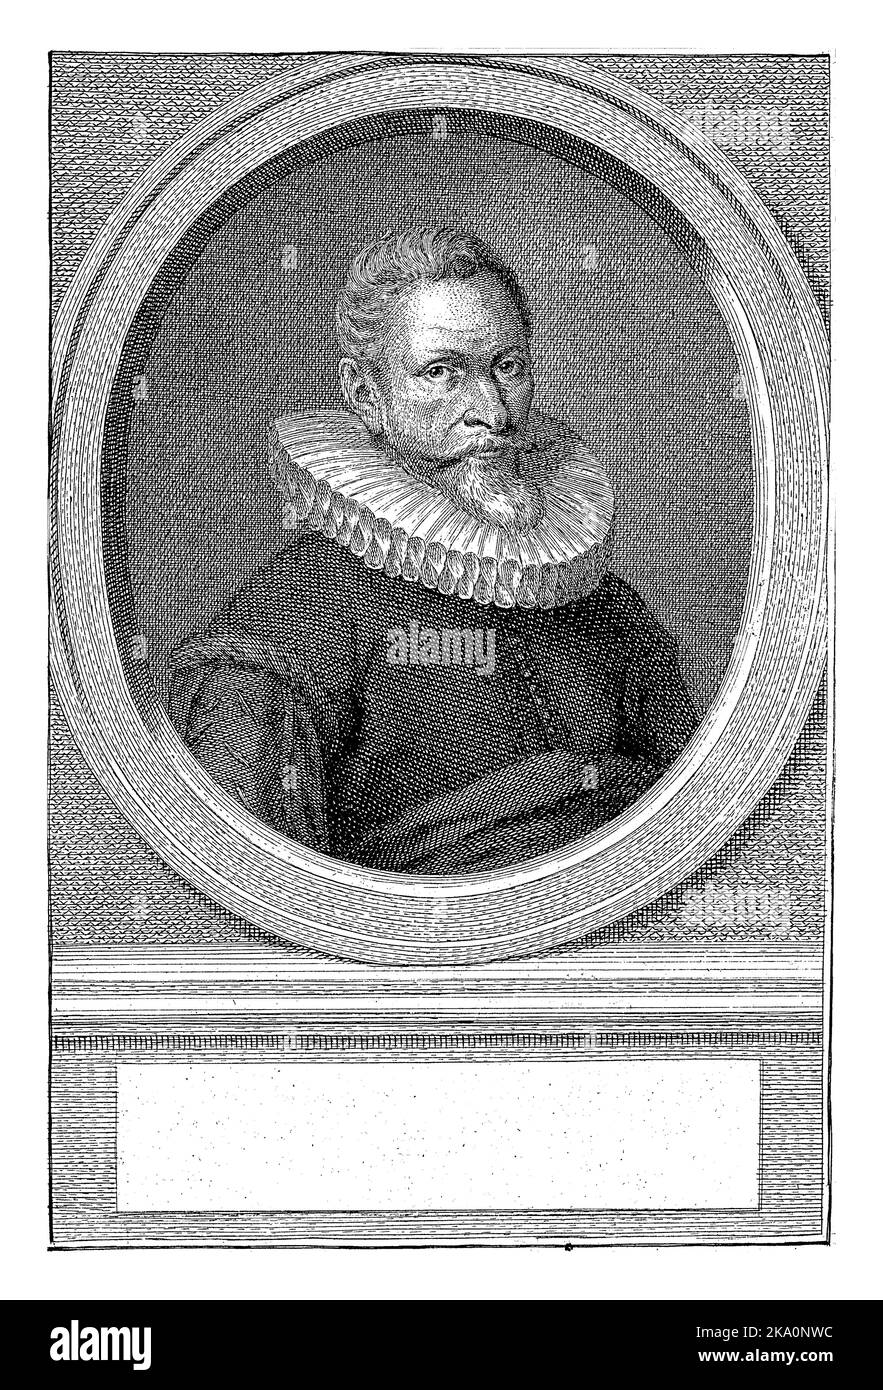 Portrait of the Amsterdam mayor and councilor Jacob Cornelisz Banjaert, called Van Neck, in an oval. The portrait rests on a plinth with an empty fiel Stock Photo